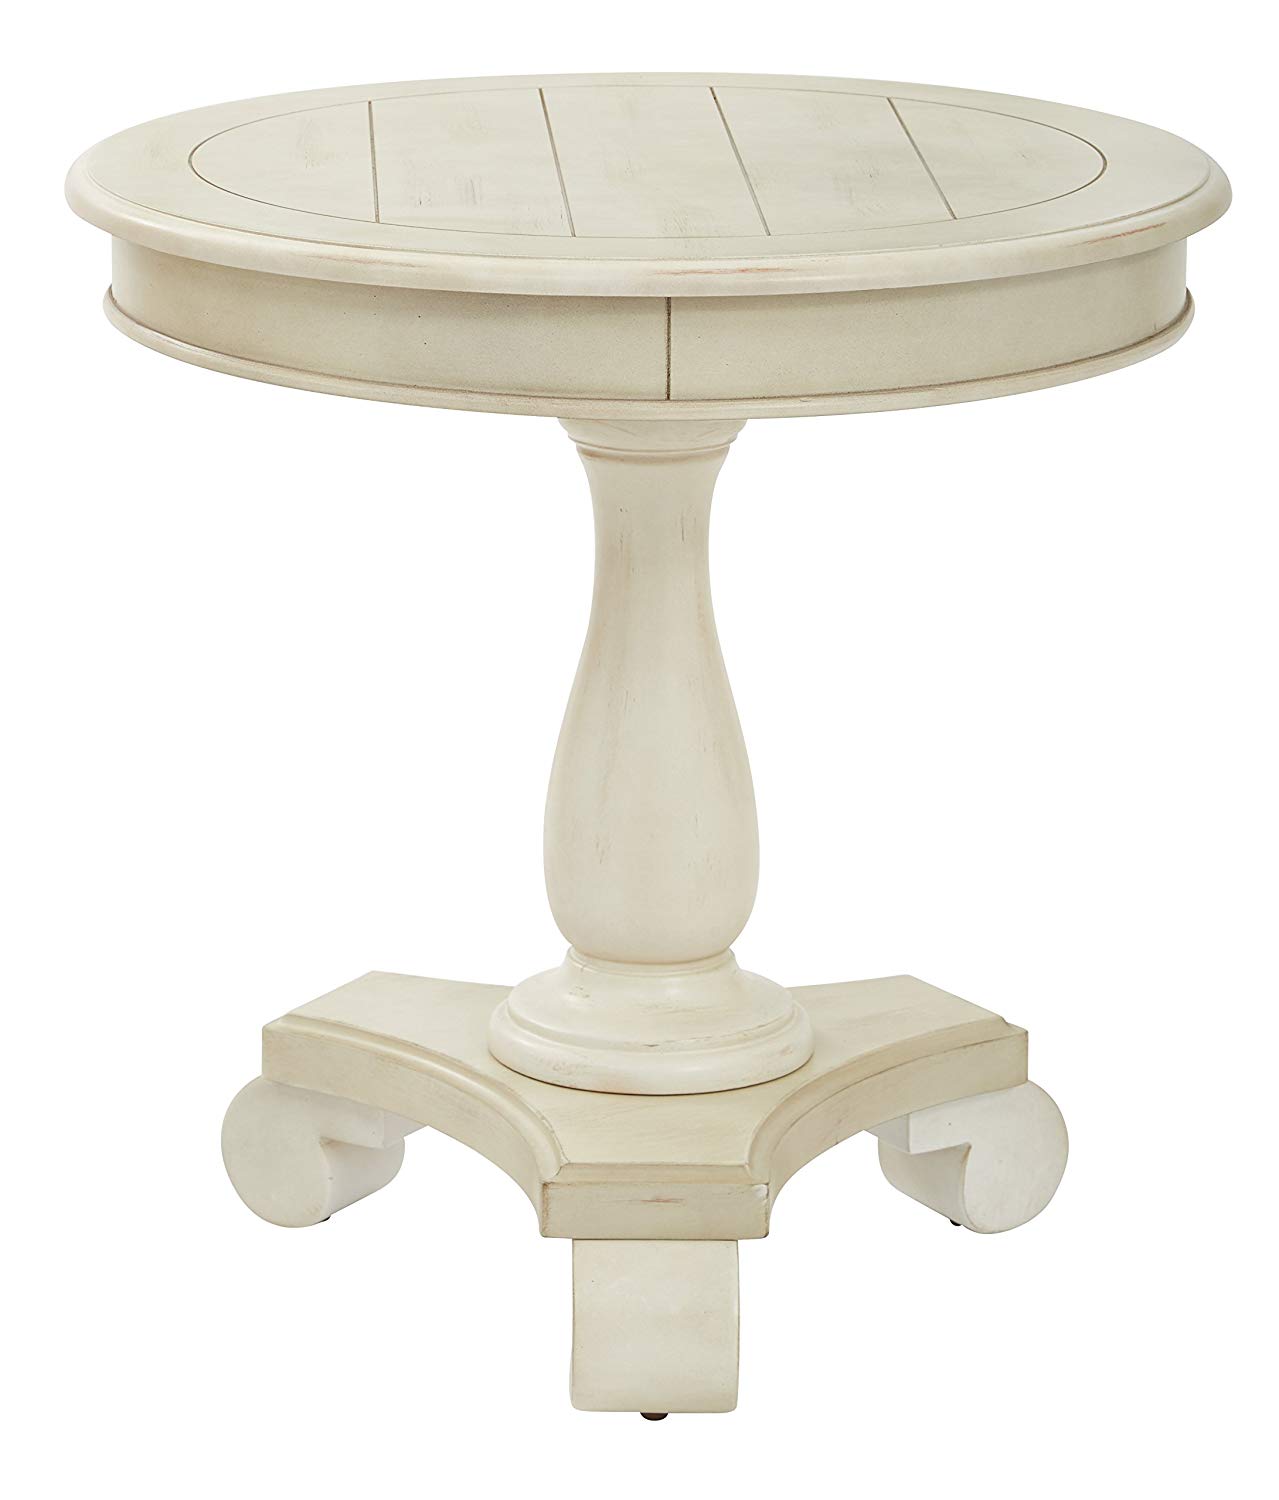 inspired bassett avlat osp avalon round accent table with screw legs antique beige kitchen dining french style small nautical end tables pottery barn spotlight lamp gray coffee